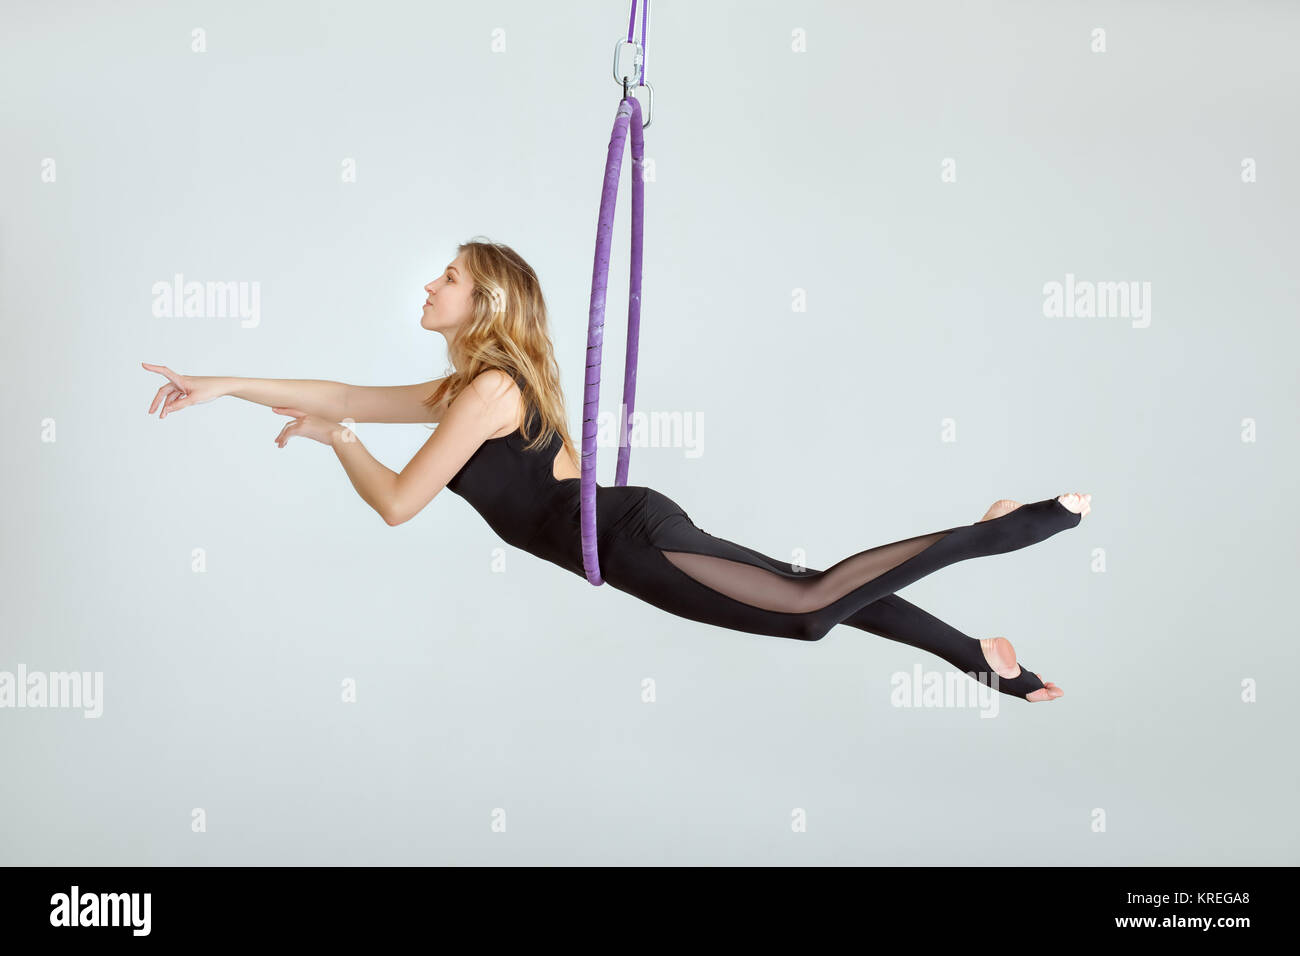 The acrobat has hung on a hula hoopa, she performs a dance at a height. Stock Photo